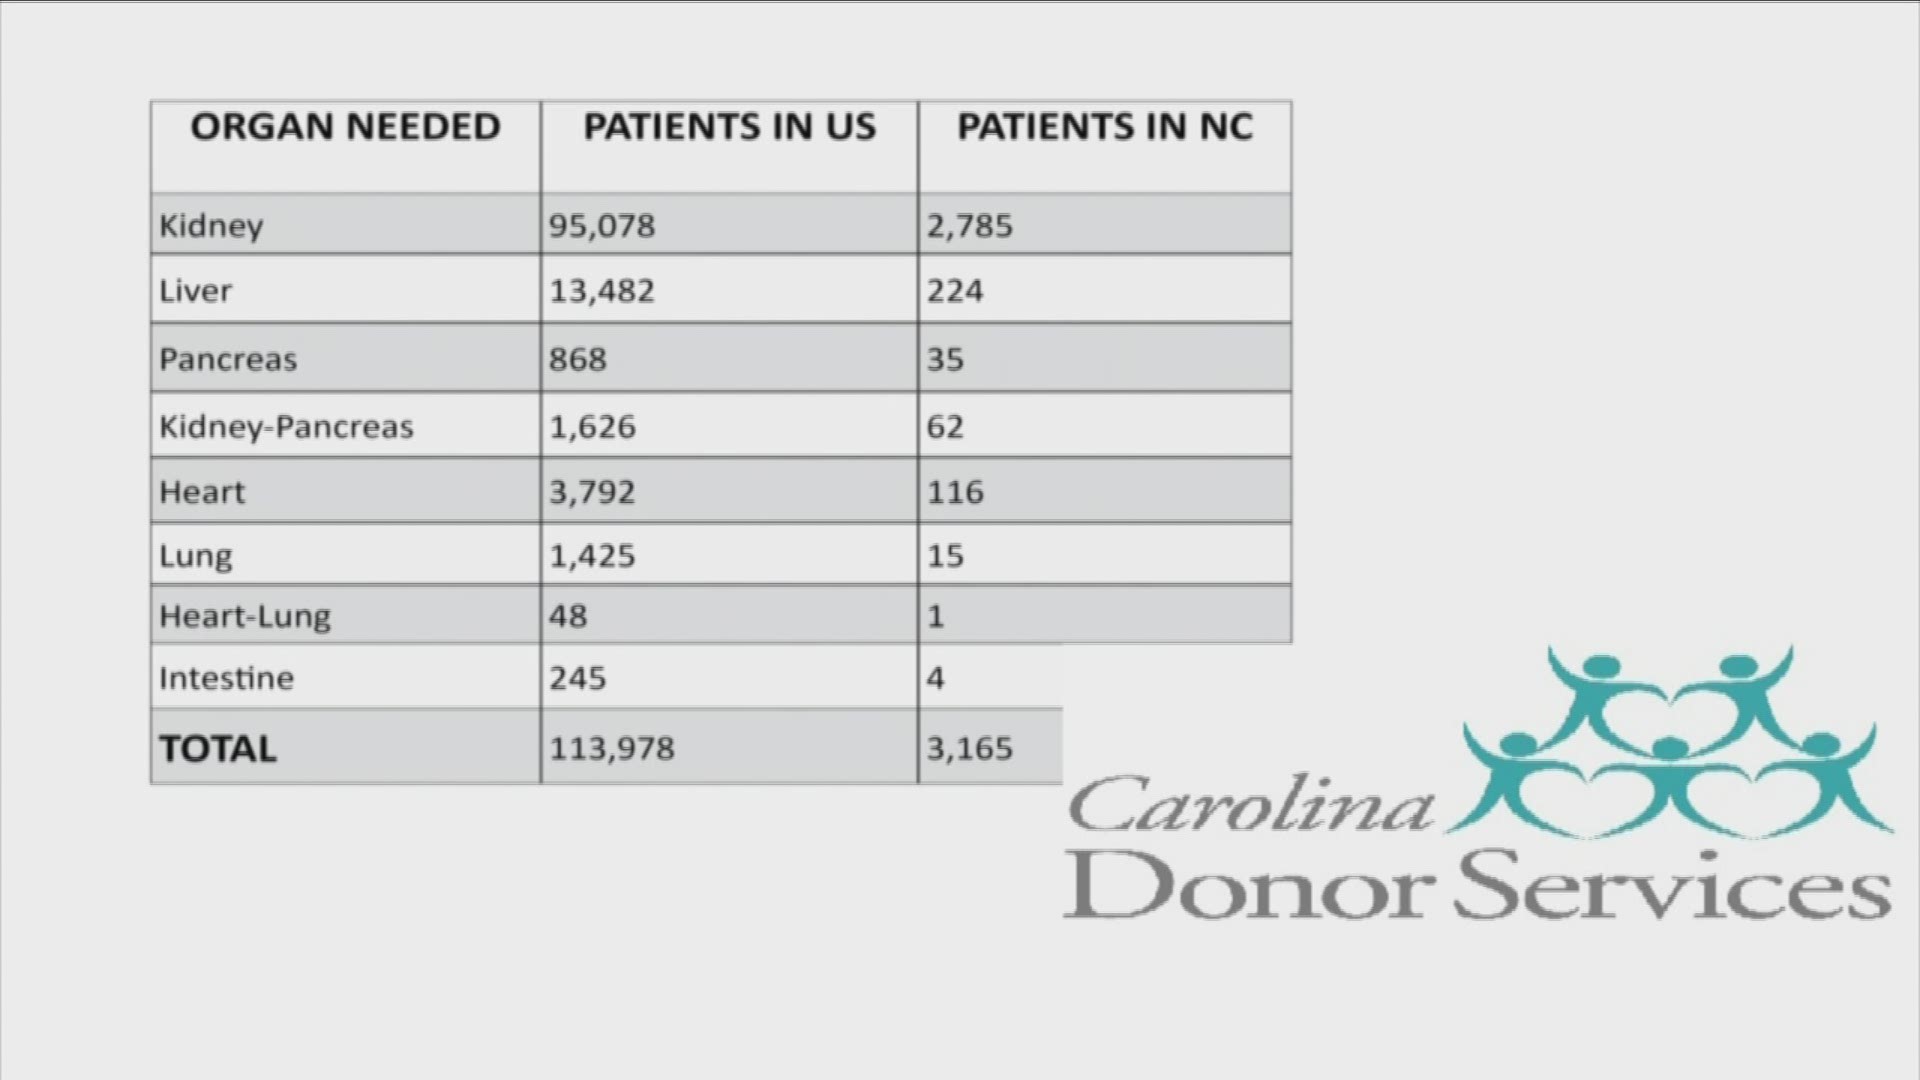 Thousands of people in NC need an organ donation. There are several frequently asked questions about becoming a donor, and 2 Wants to Know went looking for answers.